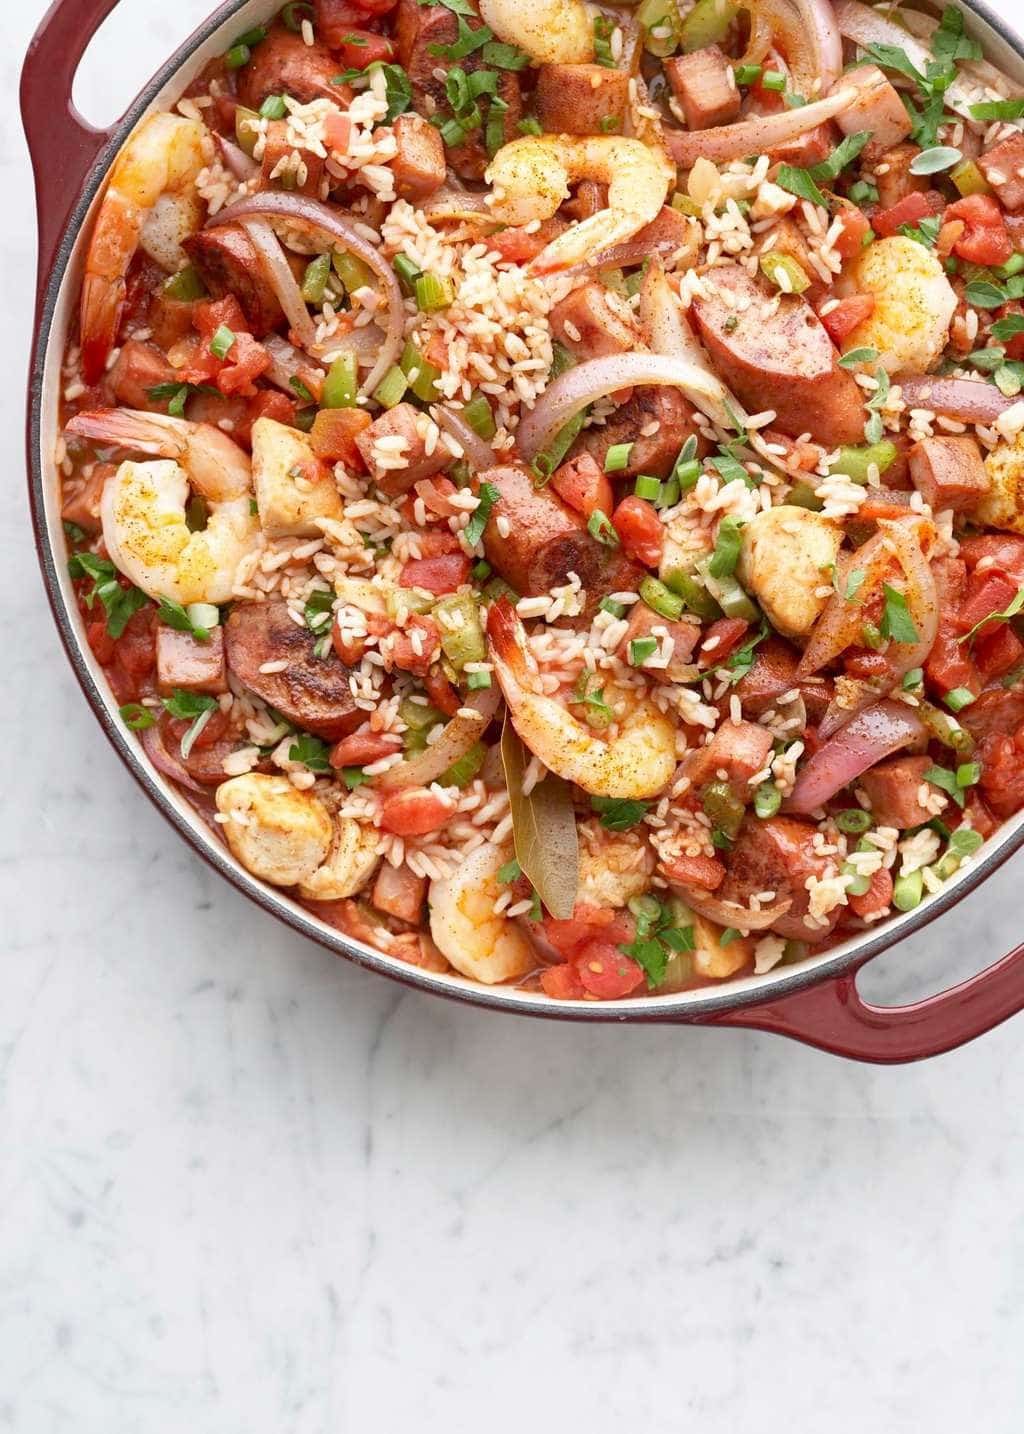 Classic Creole one pan jambalaya with shrimp and sausage in le Creuset